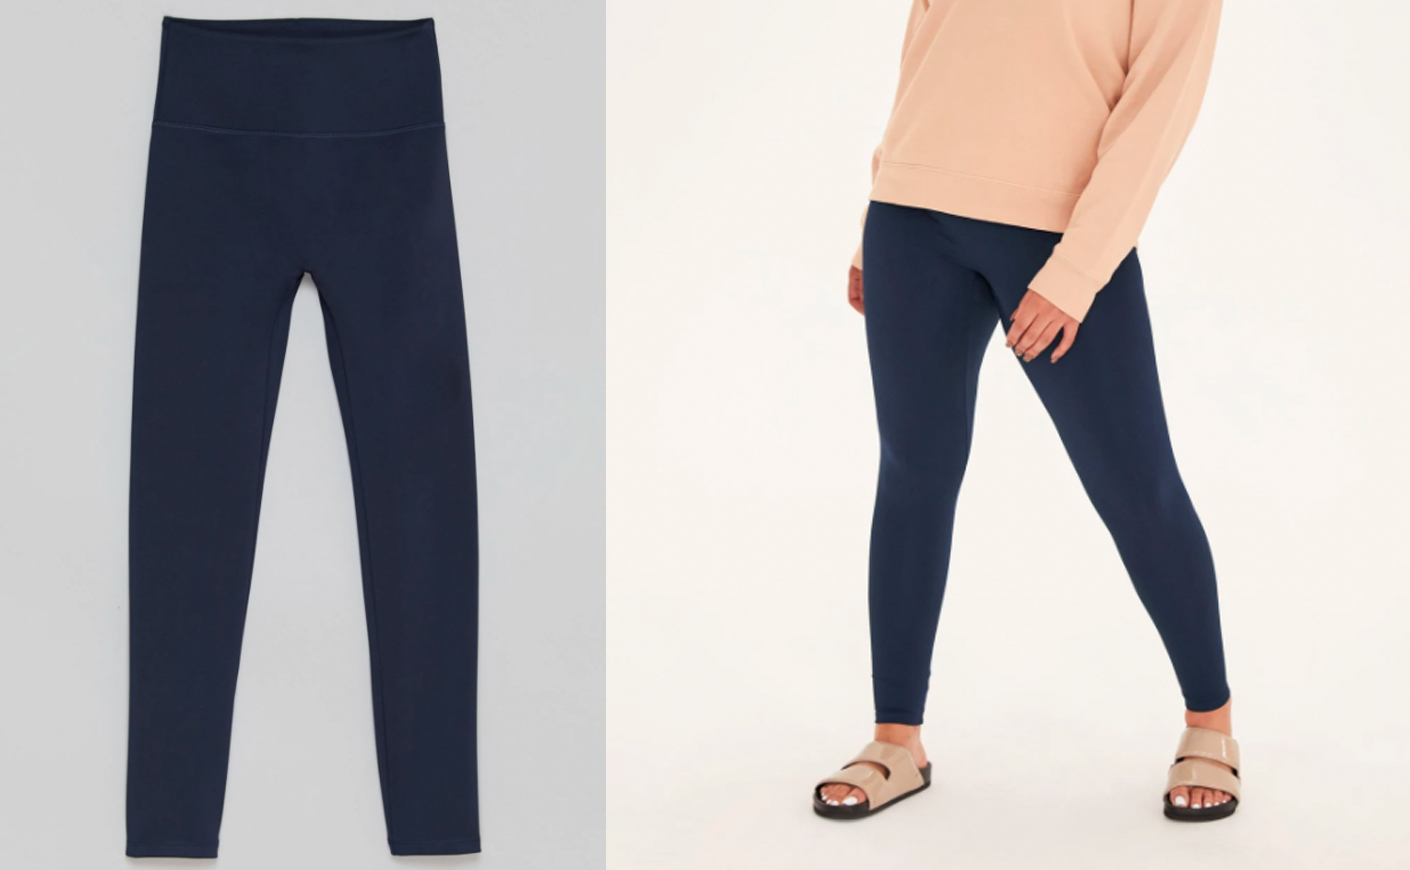 Shop These Warm and Cozy Bottoms to Stay Warm